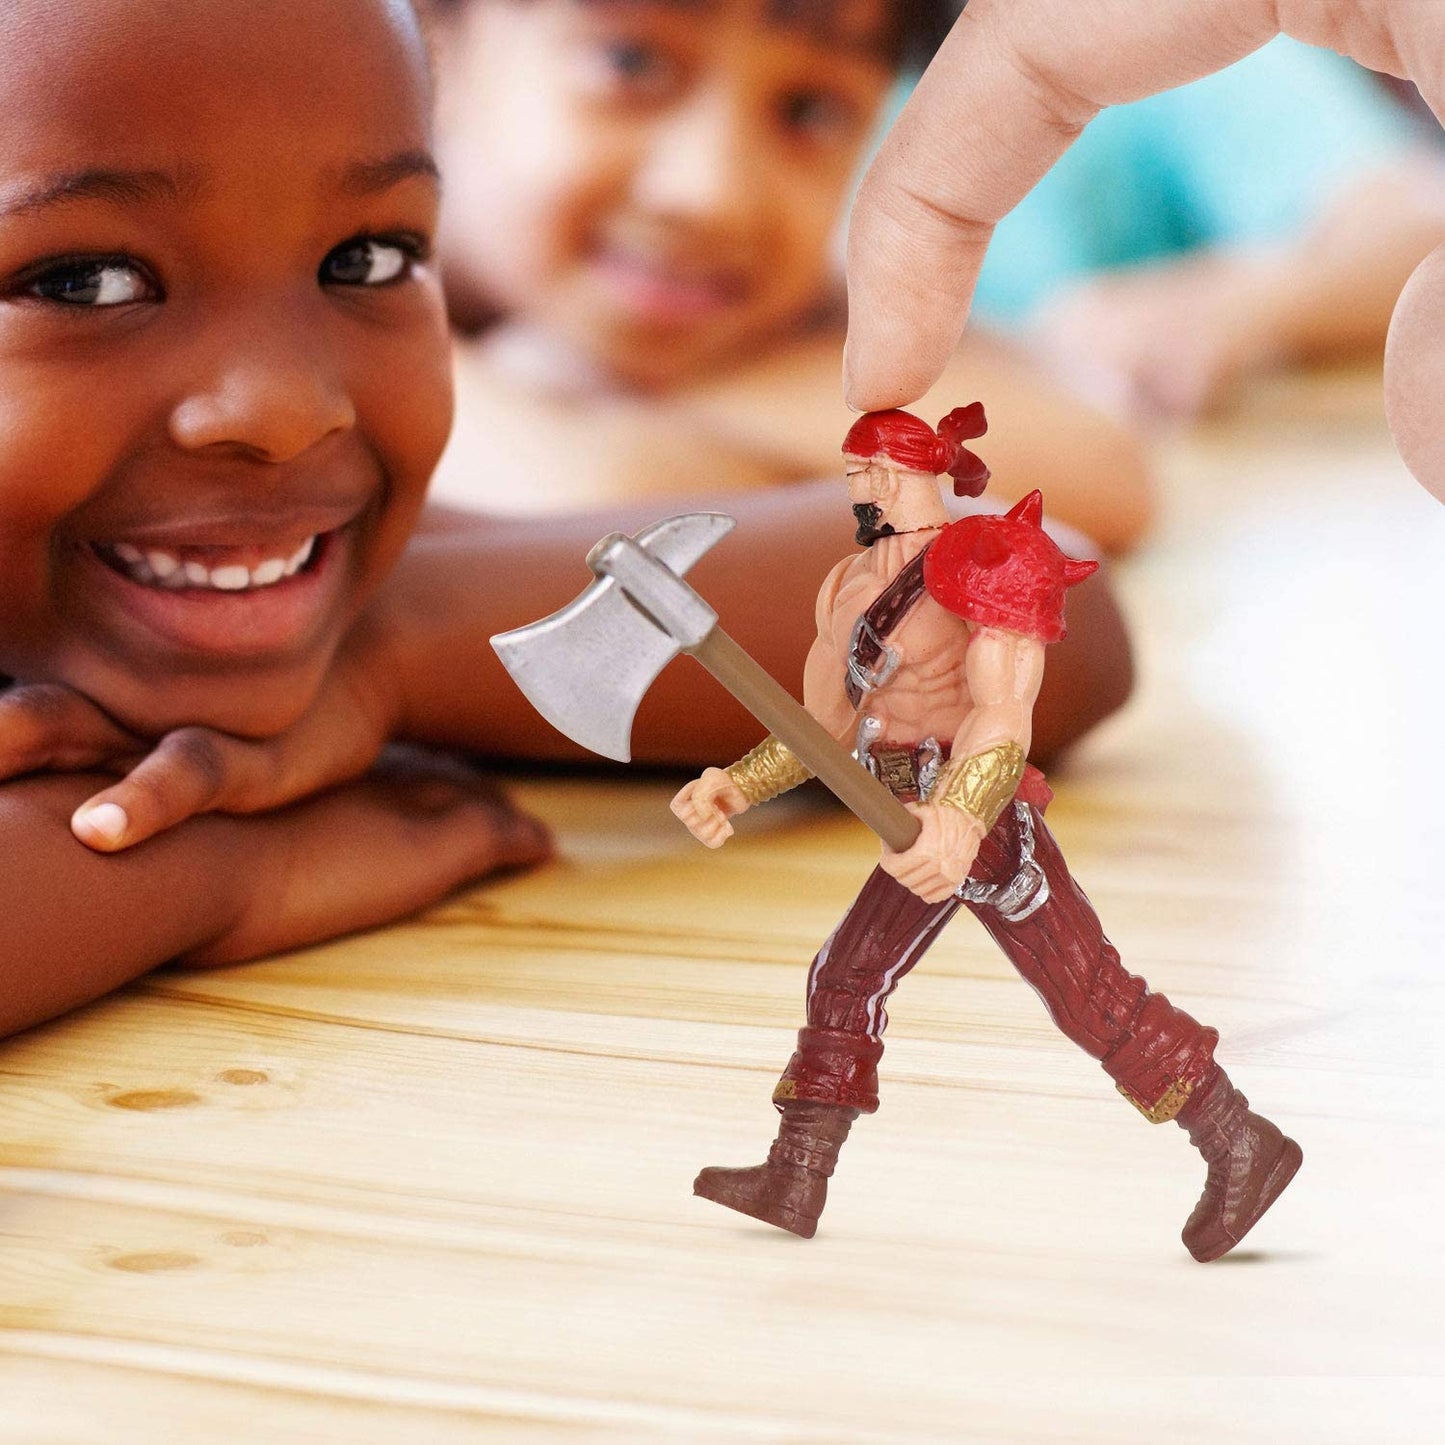 6 Pcs Pirates Action Figure Toy (Each 3.75 Inch Tall ), Great for Boys Kids as Birthday,Christmas Day, Carnival Fun Gift